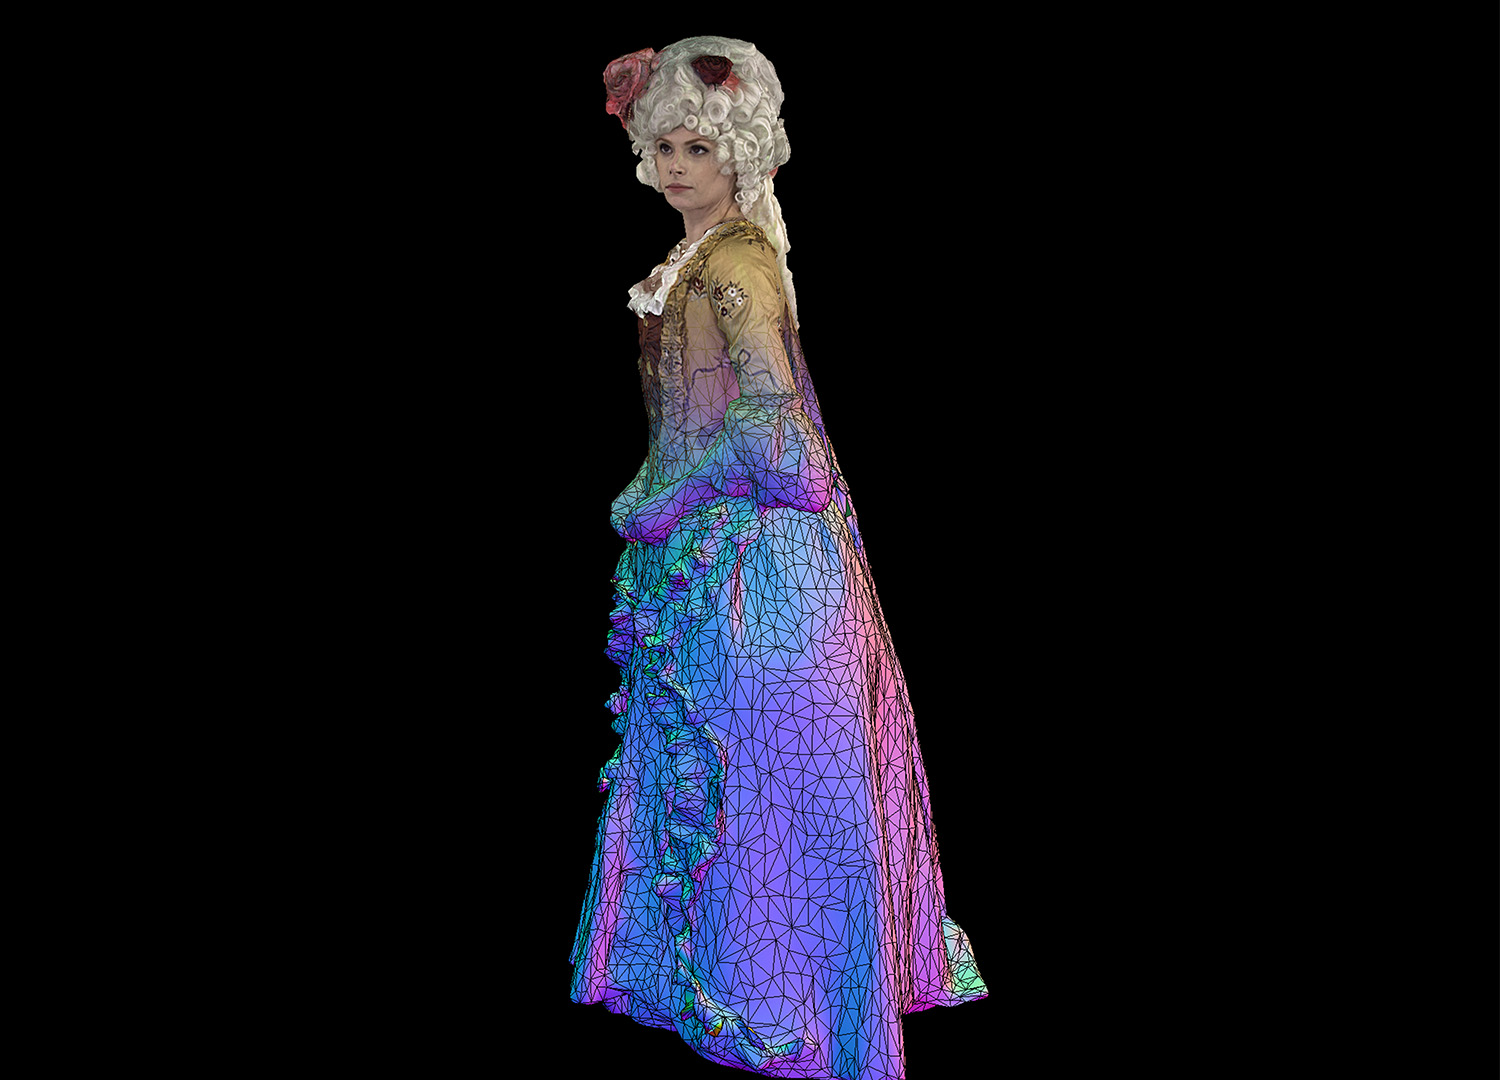 Woman in a baroque dress is captured volumetrically in 3D